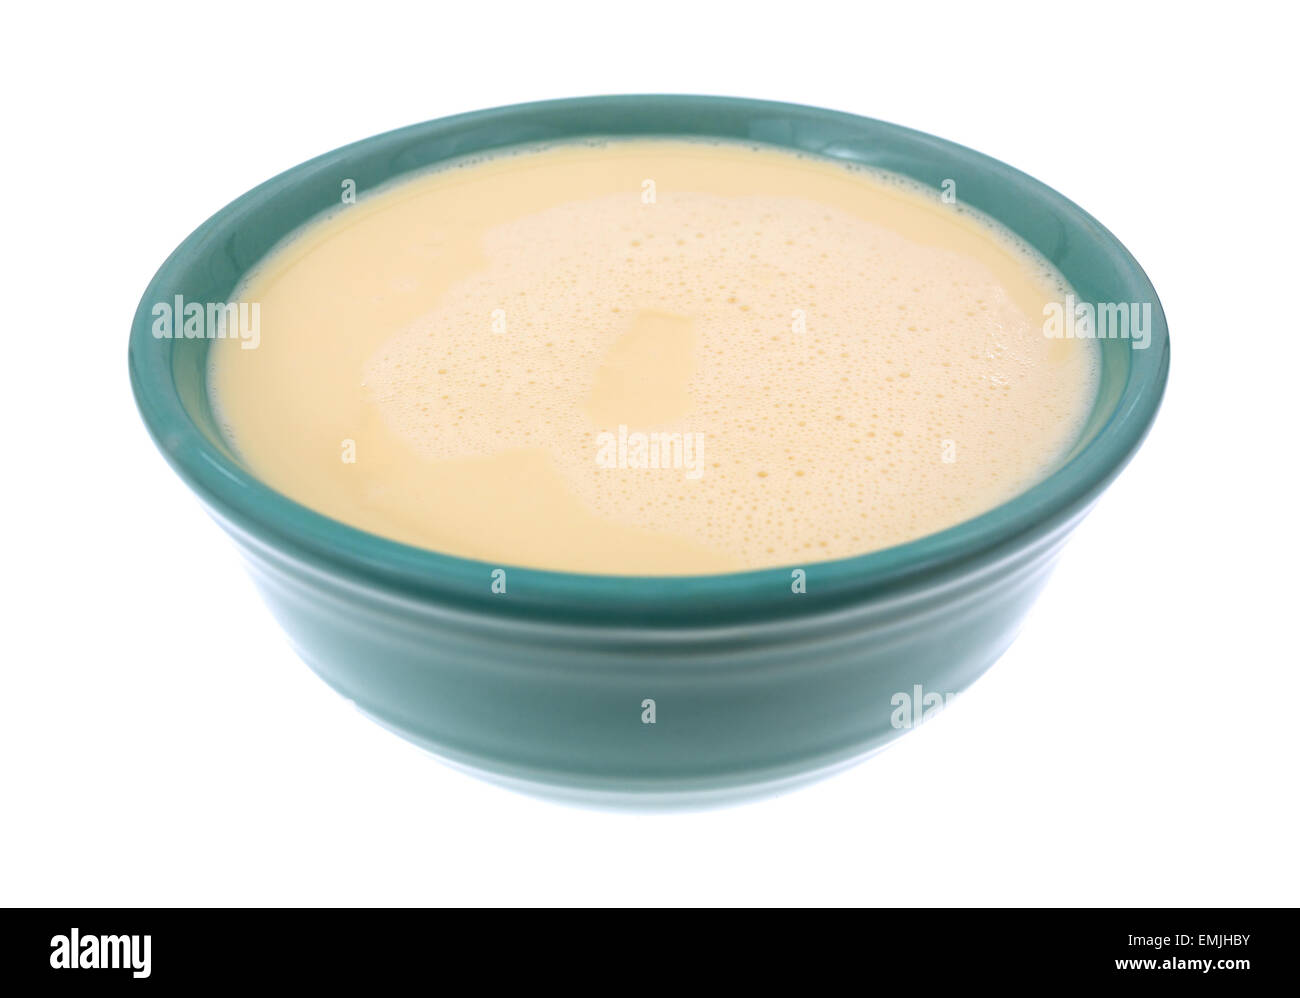 Side view of a bowl filled with evaporated milk on a white background. Stock Photo